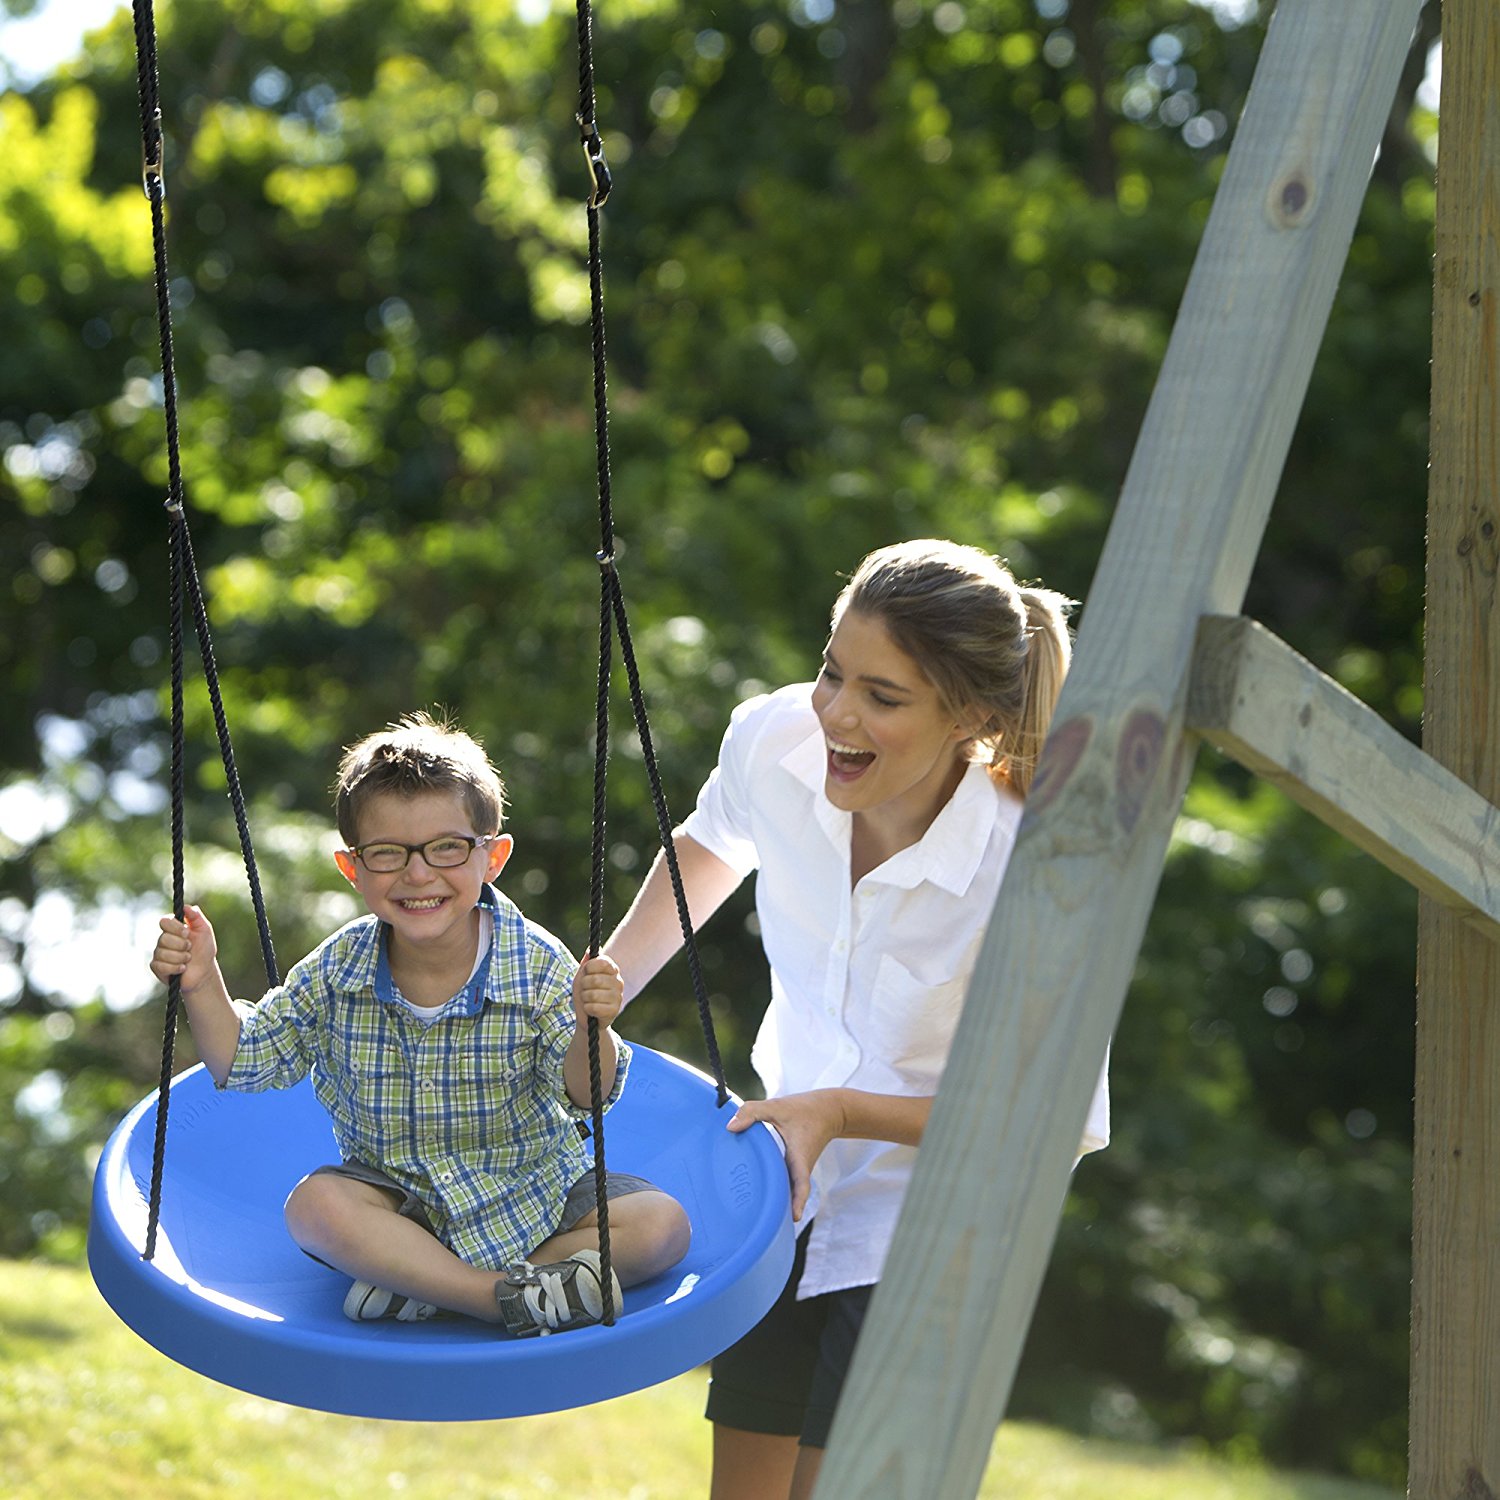 Amazon.com: Super Spinner Swing, FUN! Safe Solid Comfortable Seat ...